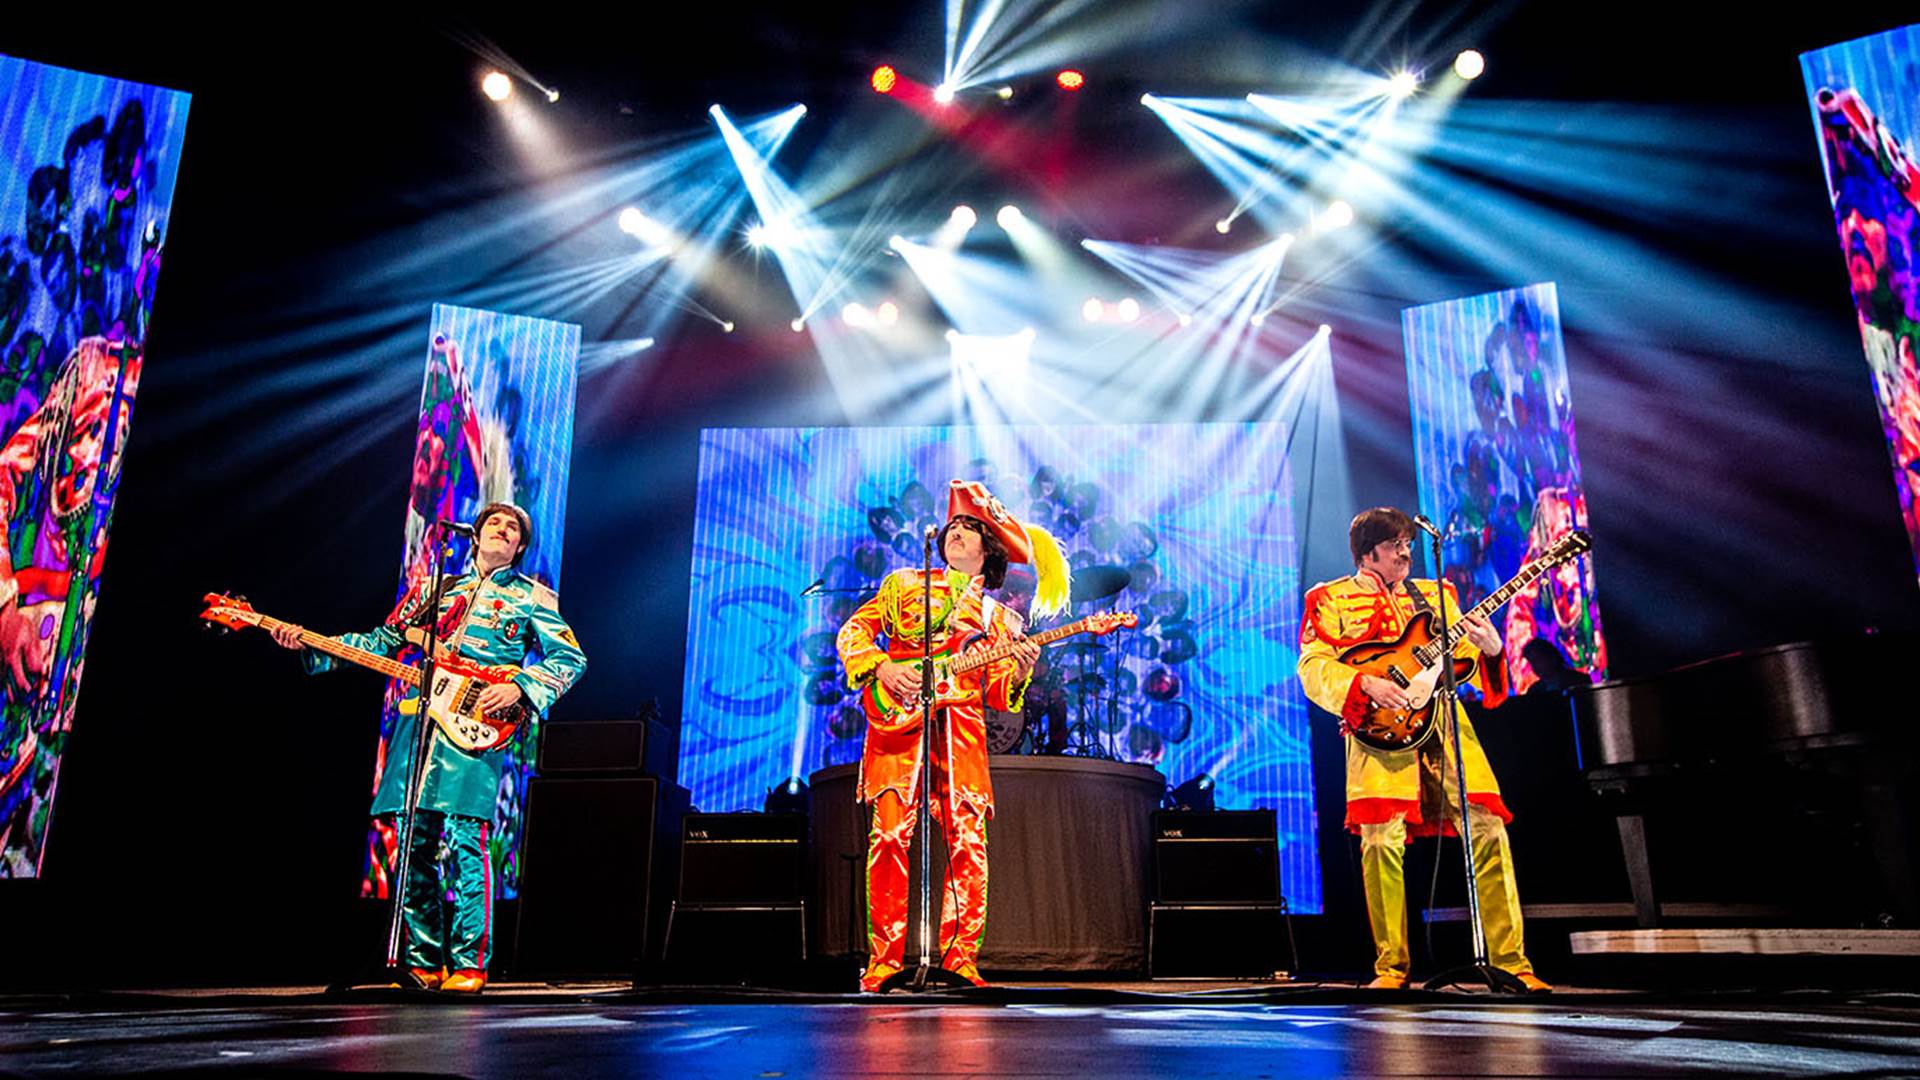 Four Beatles impersonators performing on stage with guitars. They are wearing colorful Seargent Peppers outfits and large projections are behind them.